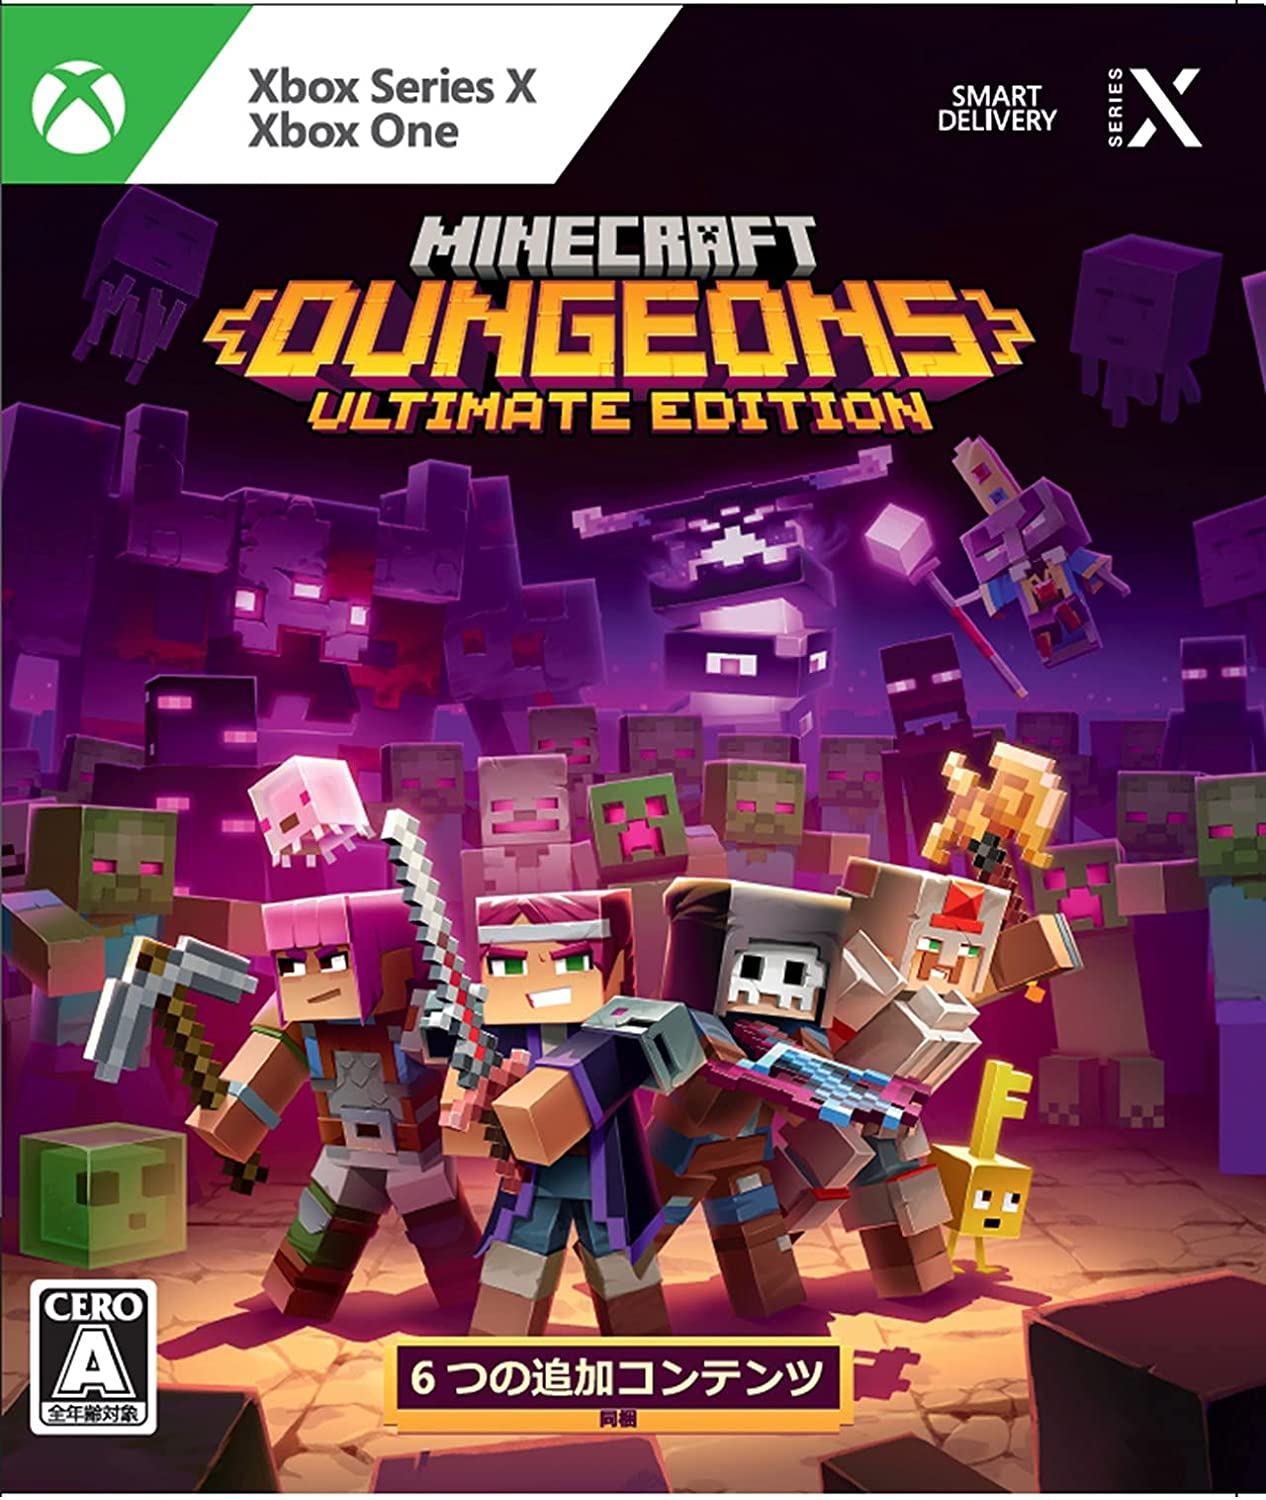 Xbox One, Edition] Xbox Dungeons X Series for Minecraft [Ultimate